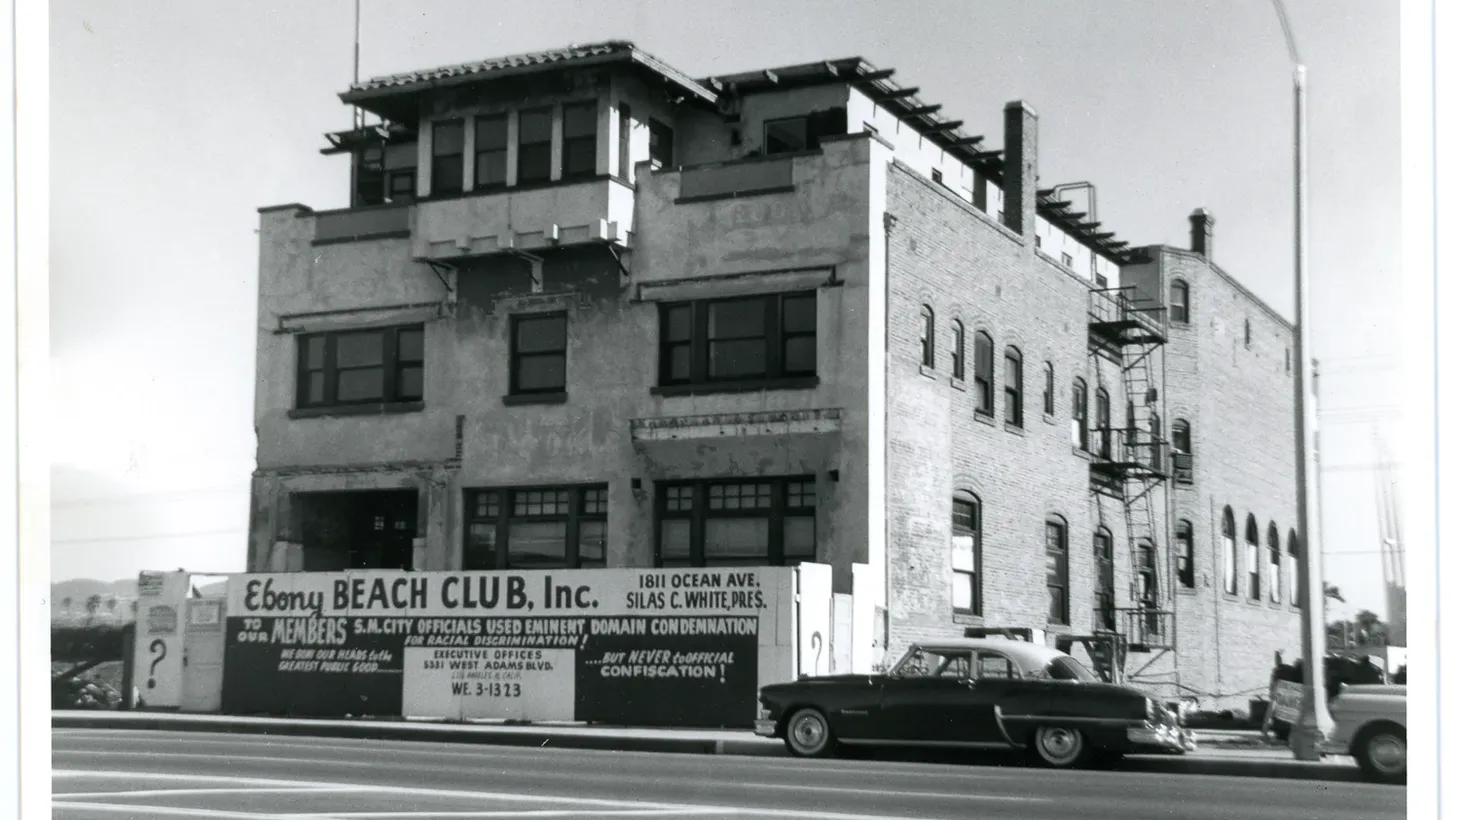 The Ebony Beach Club was a place where African Americans could feel safe from discrimination while at the beach in Santa Monica.